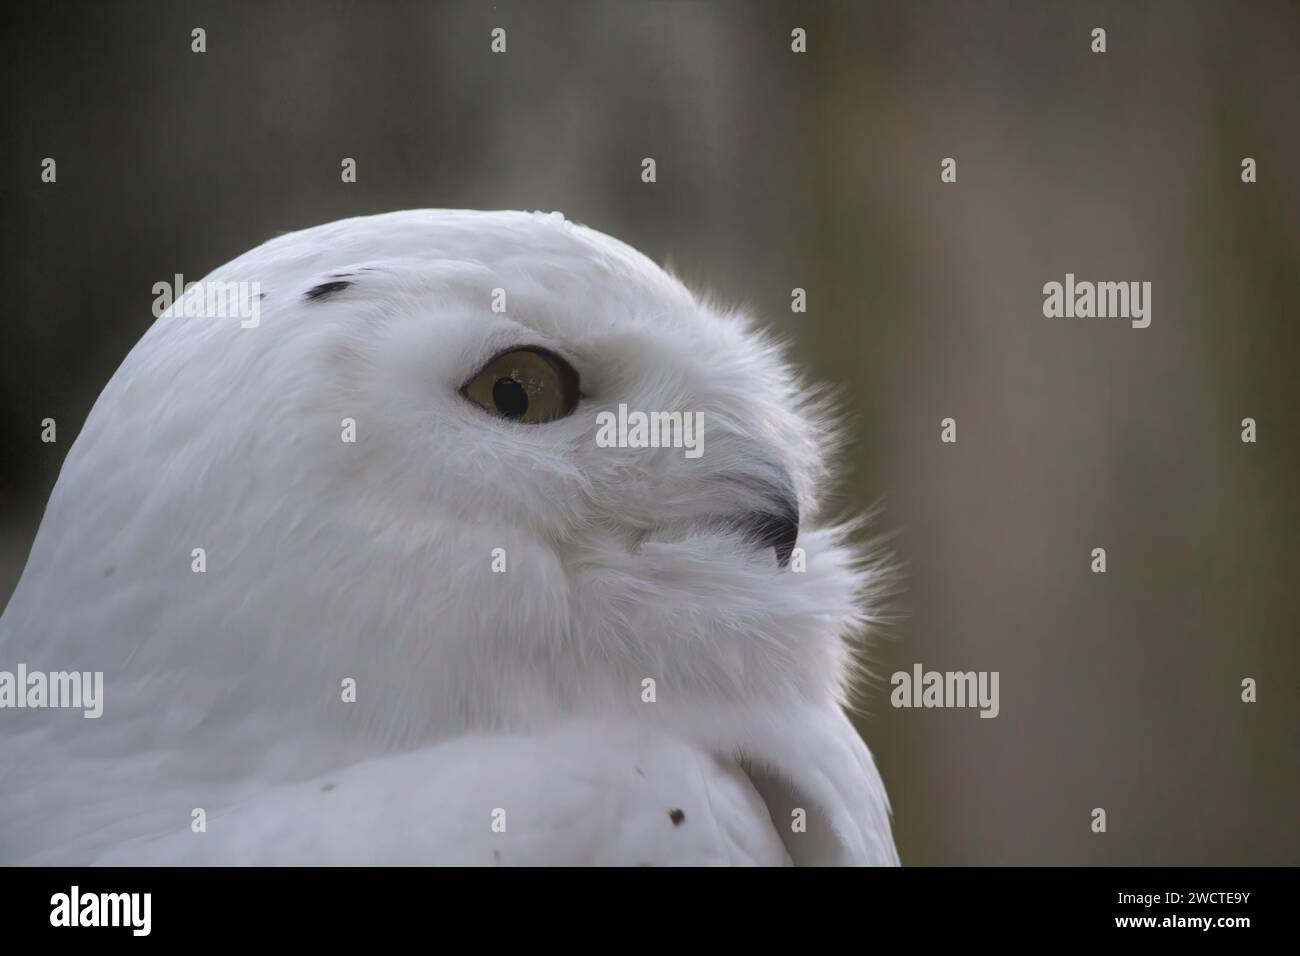 The Snowy Owl (Nyctea scandiaca) (Bubo scandiacus) is a large owl of the typical owl family Strigidae. The Snowy Owl was first classified in 1758 by C Stock Photo